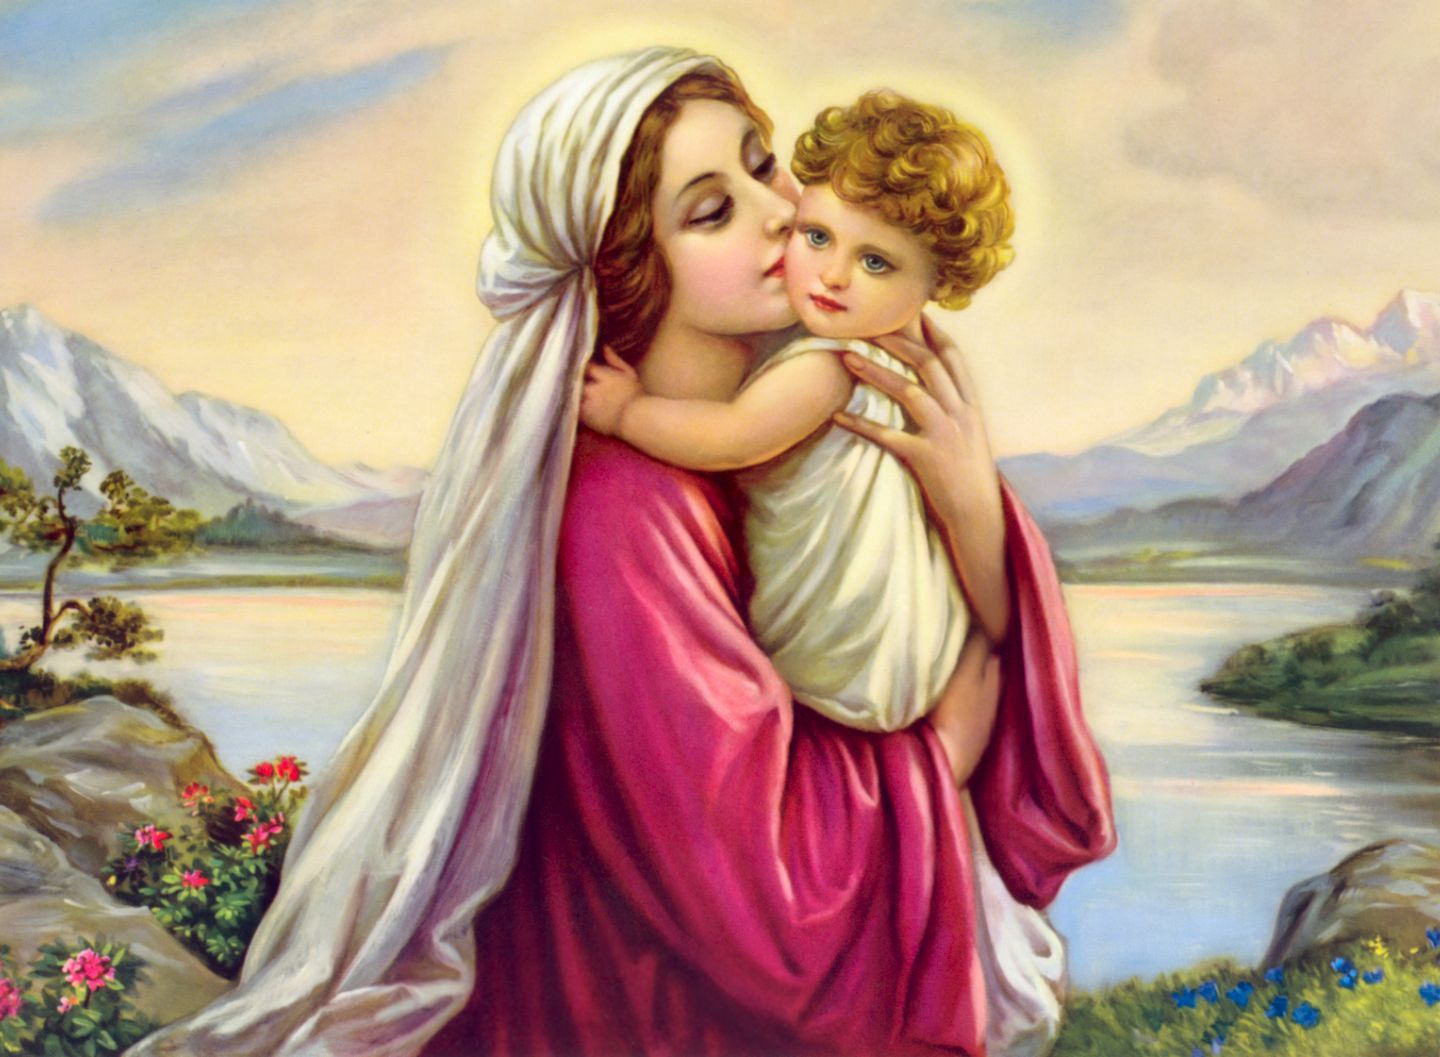 Unique Jesus And Mother Mary Image Free Download